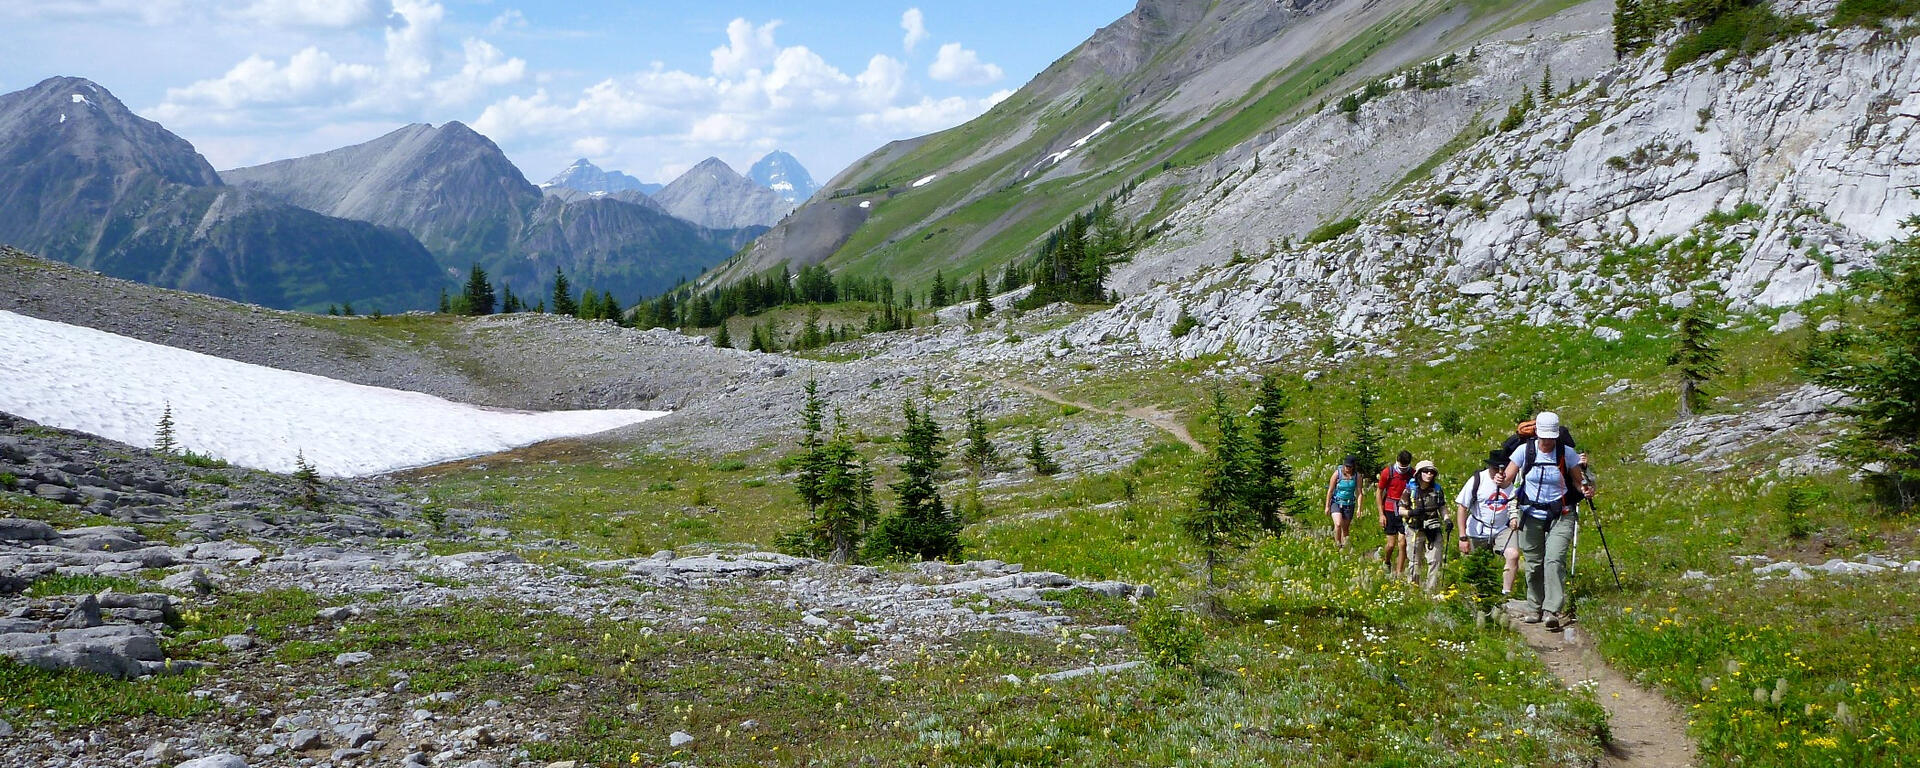 hikers on trail in pass